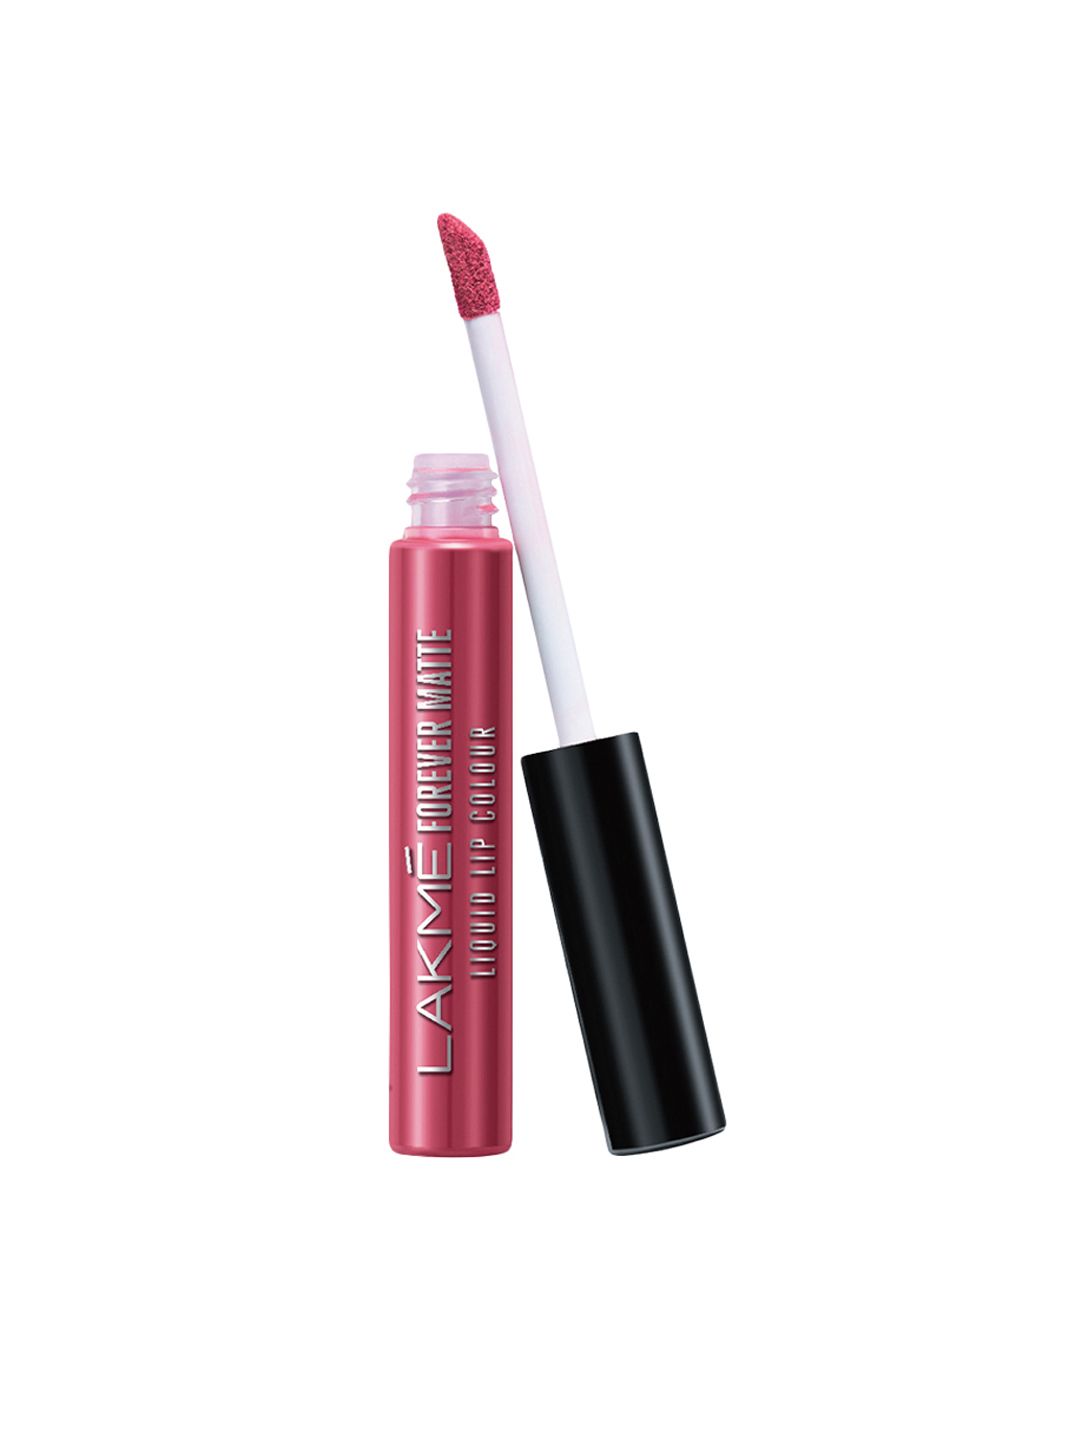 Lakme Forever Matte Liquid Lip Colour - Pink Punch 24 Price in India